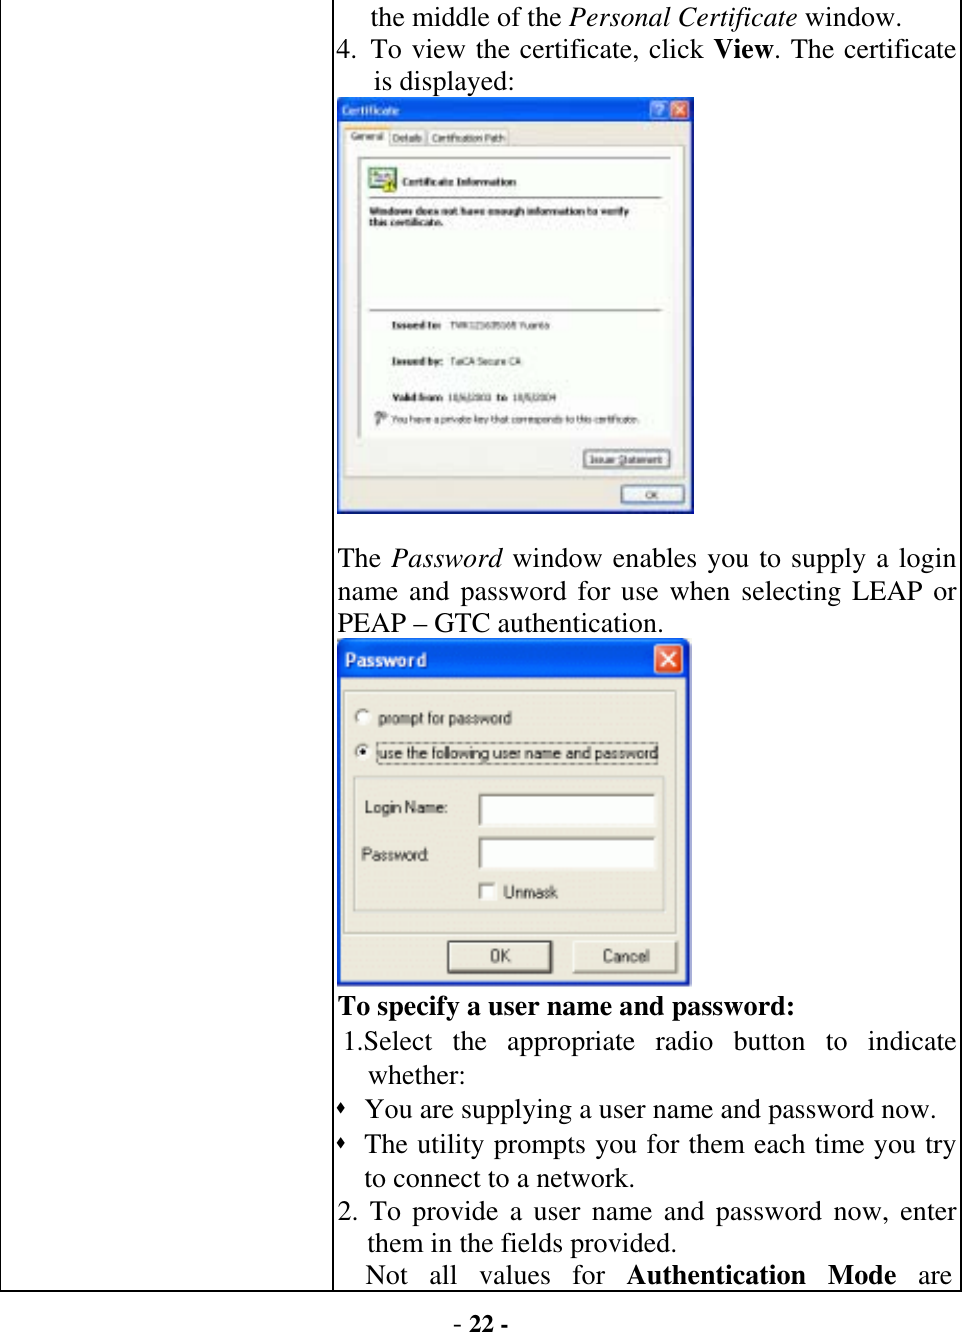  - 22 - the middle of the Personal Certificate window. 4. To view the certificate, click View. The certificate is displayed:  The Password window enables you to supply a login name and password for use when selecting LEAP or PEAP – GTC authentication.    To specify a user name and password:   1.Select the appropriate radio button to indicate whether:   You are supplying a user name and password now.  The utility prompts you for them each time you try to connect to a network.   2. To provide a user name and password now, enter them in the fields provided.   Not all values for Authentication Mode are 